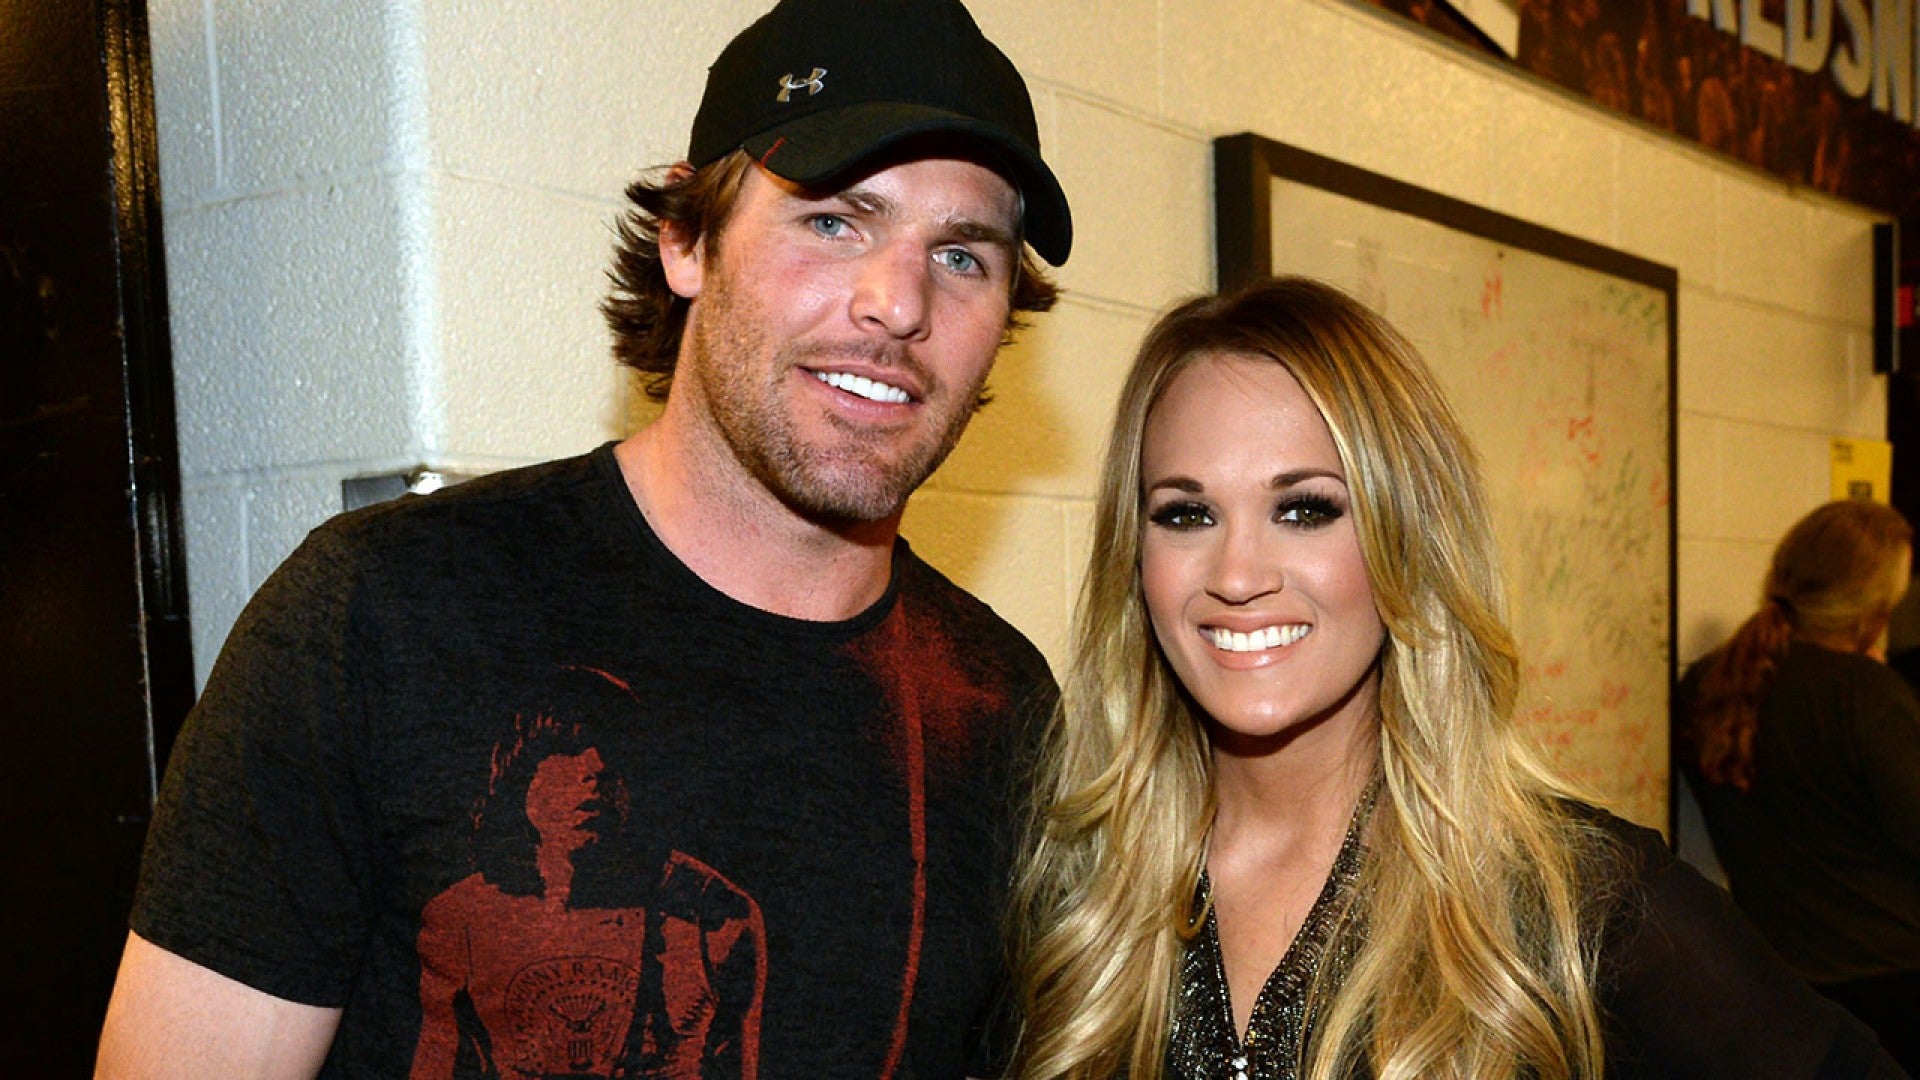 mike fisher nhl